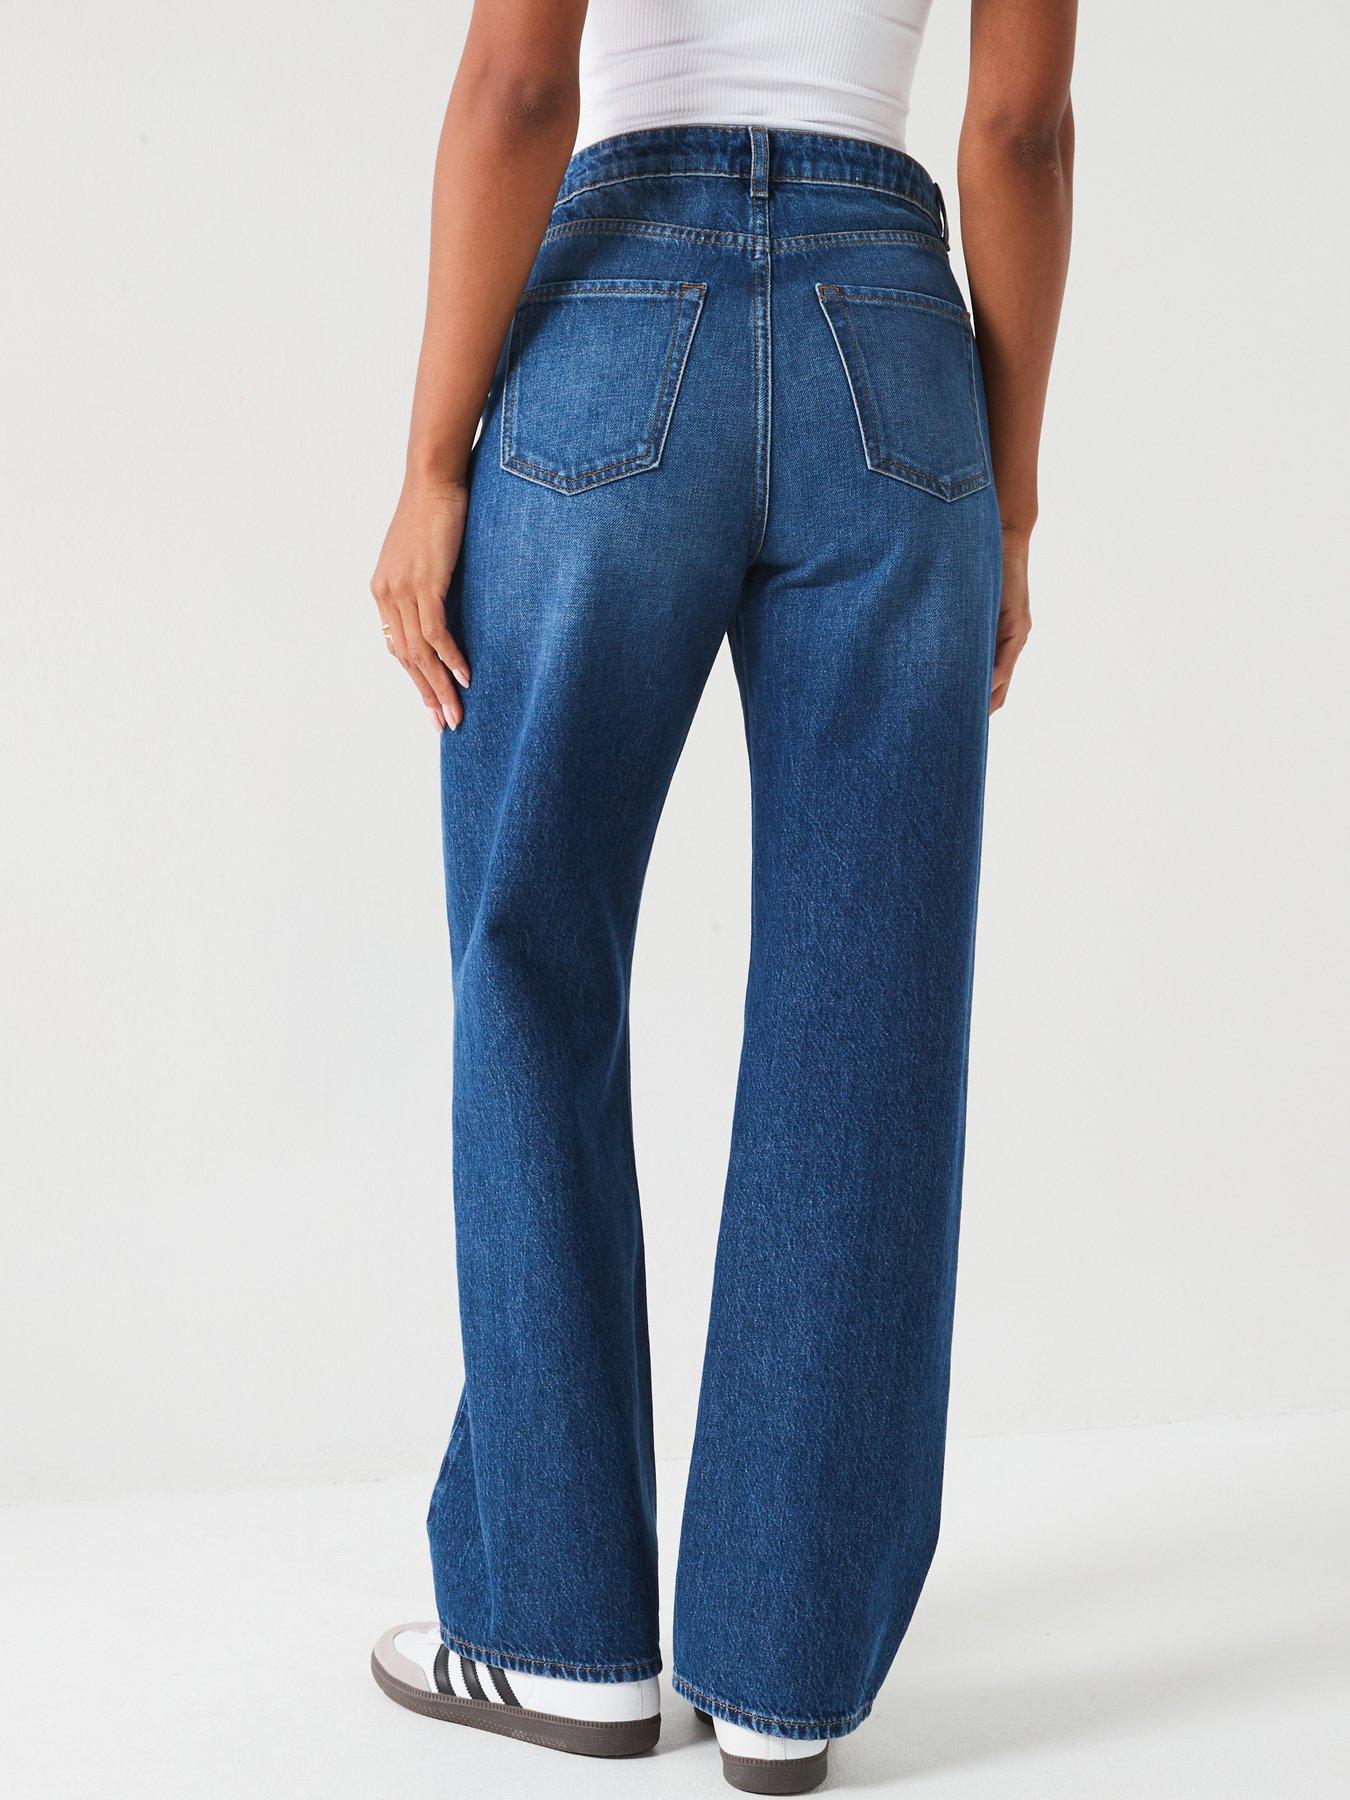 V by Very Displaced Seam Wide Leg Jeans - Dark Wash Blue | Very.co.uk